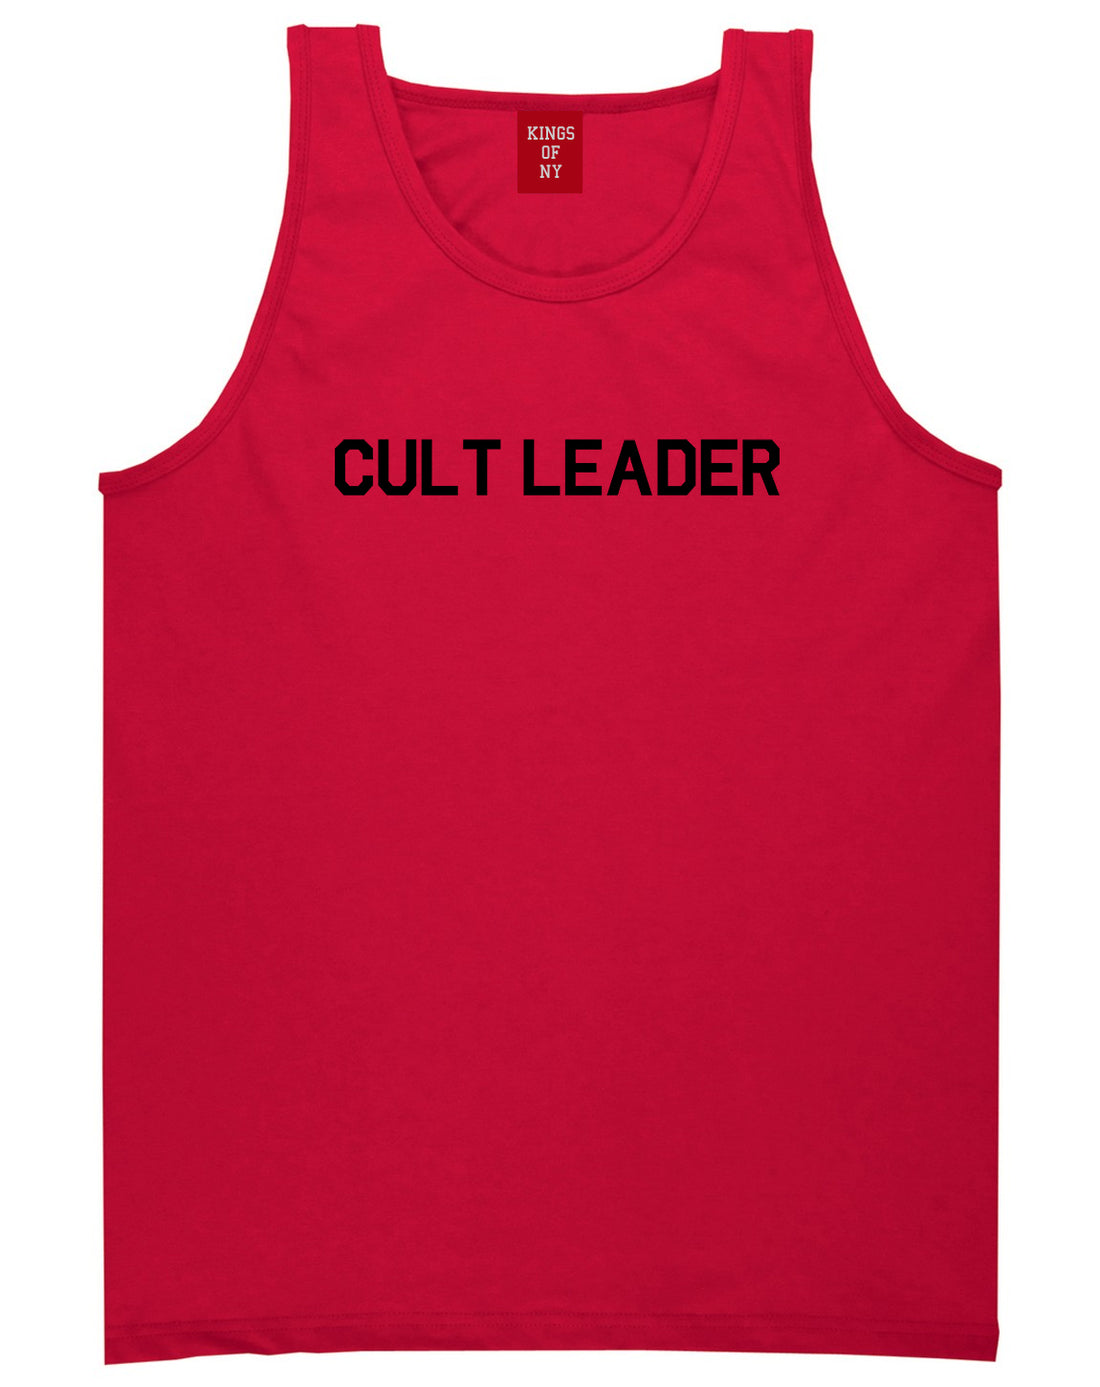 Cult Leader Costume Mens Tank Top Shirt Red by Kings Of NY